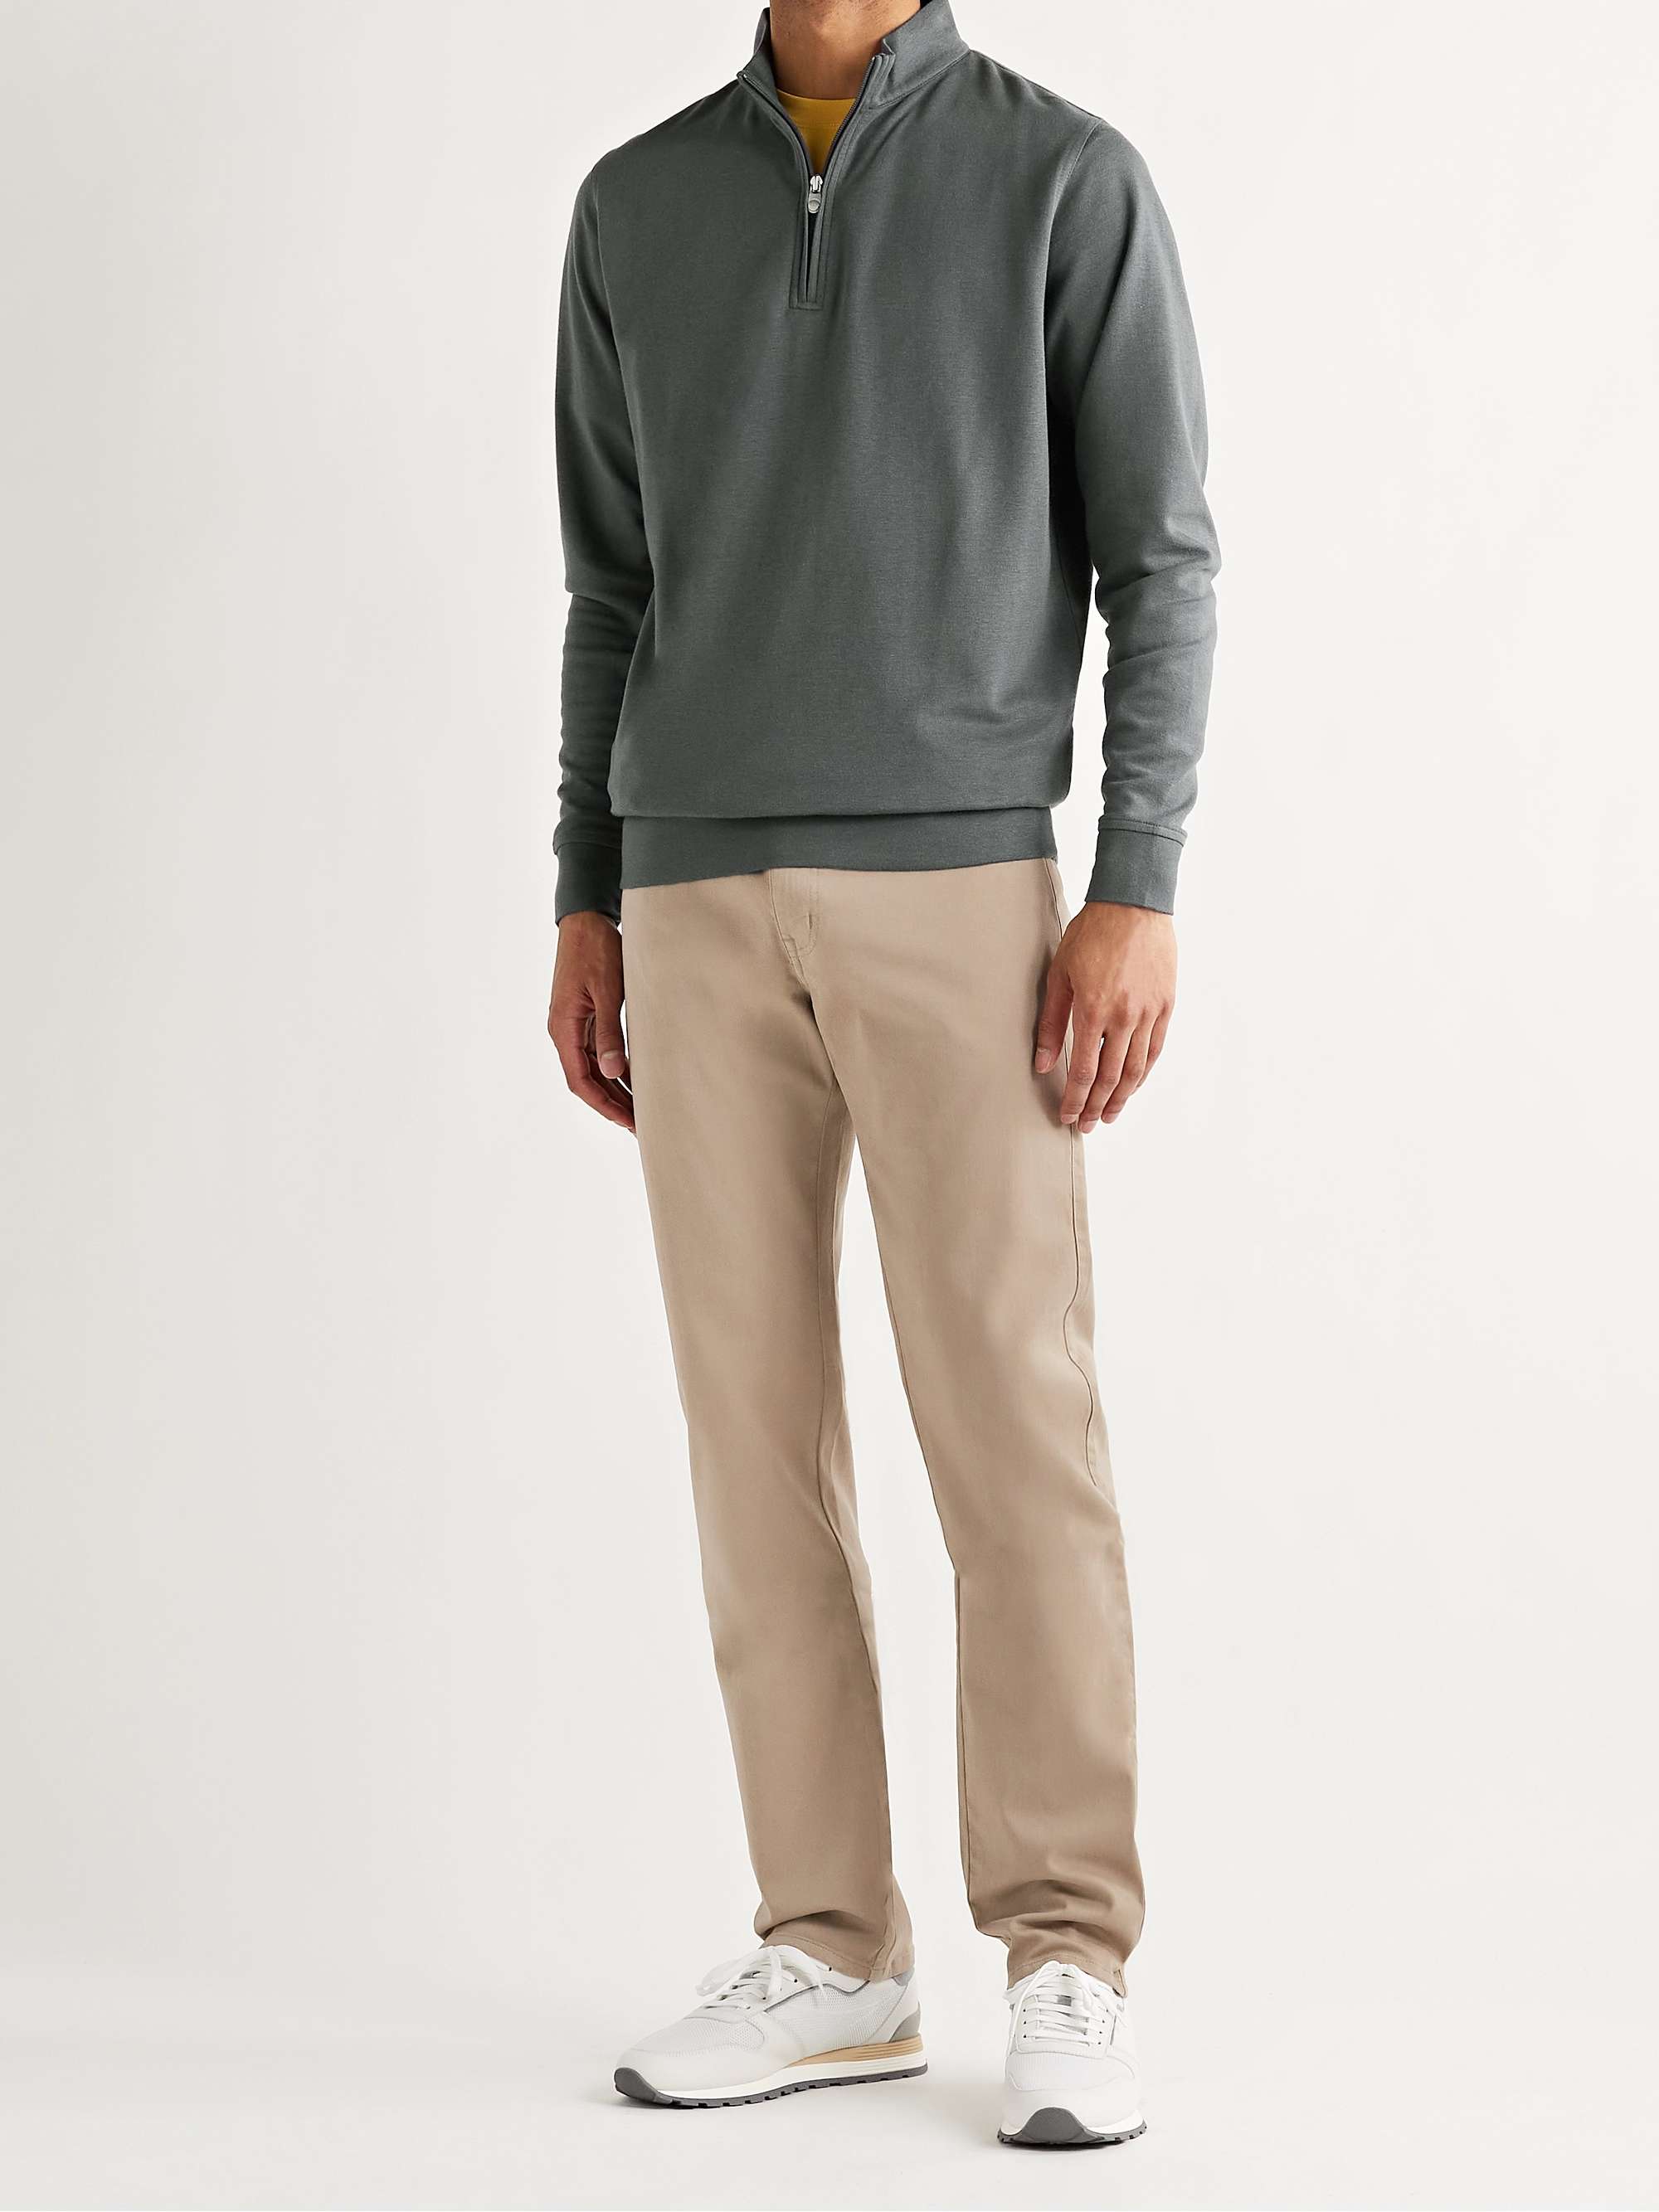 PETER MILLAR Ultimate Stretch Cotton and Modal-Blend Sateen Trousers